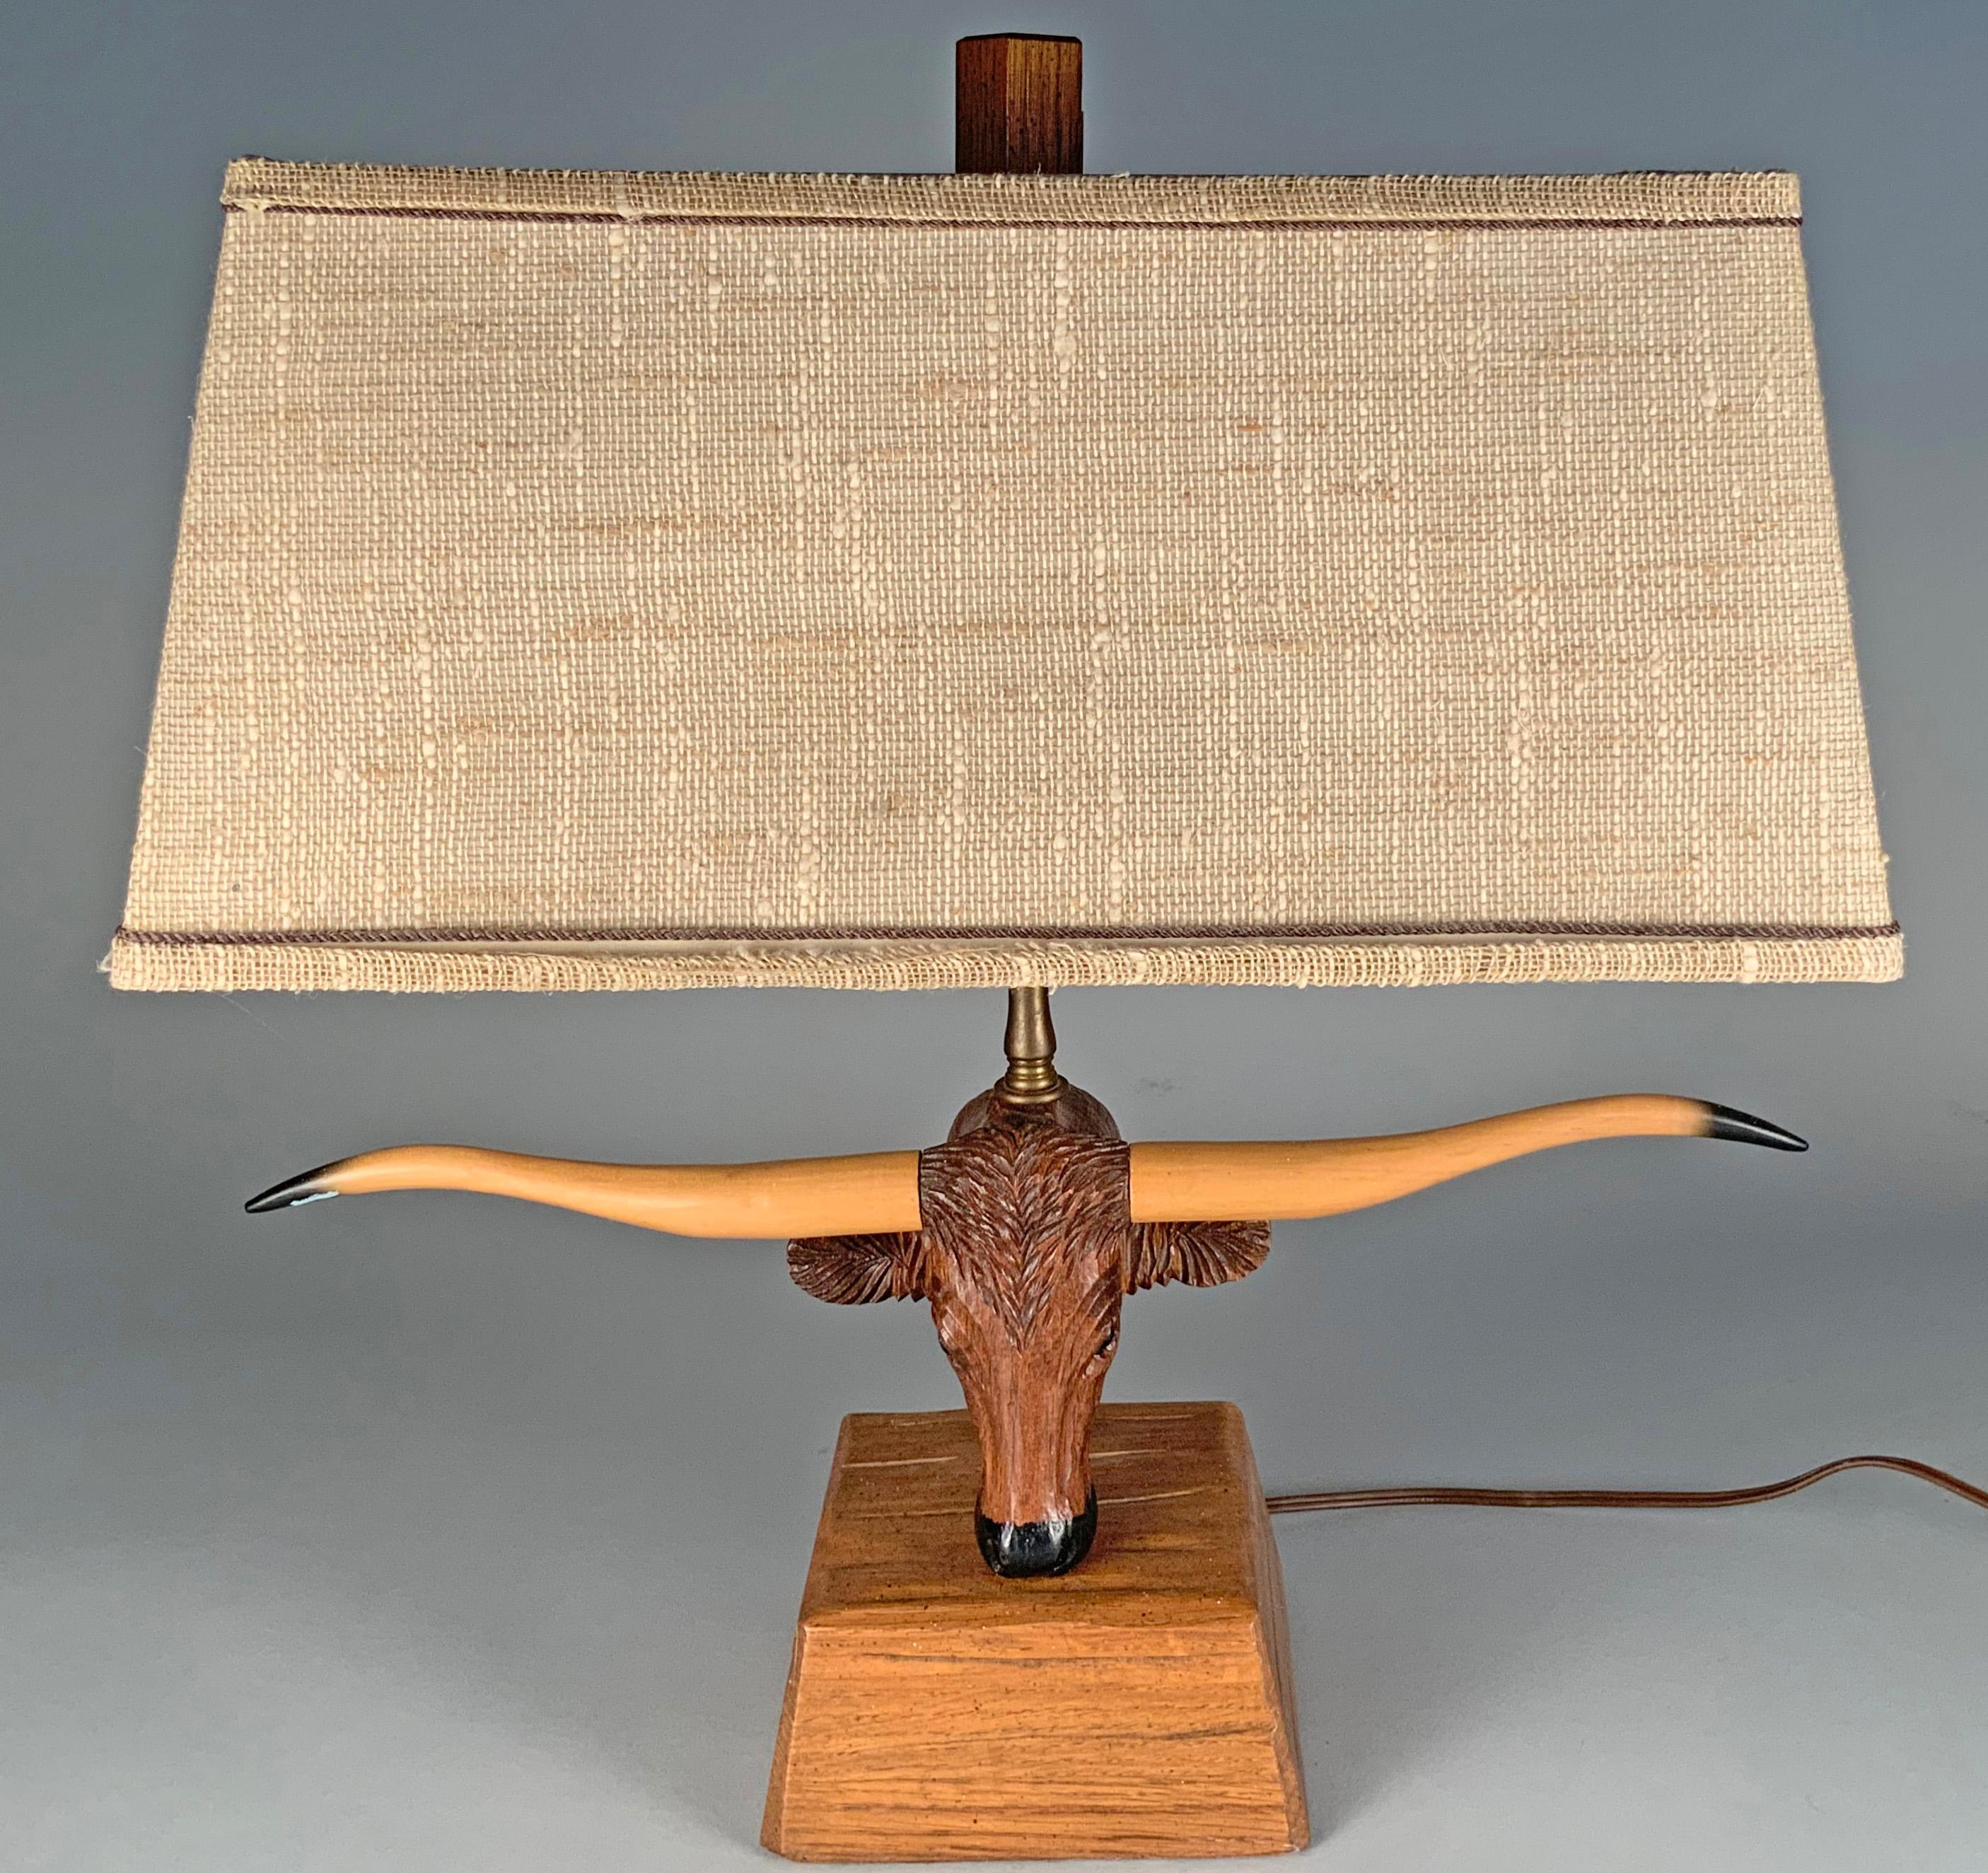 A very charming vintage 1950s small table lamp, with a base of carved oak, and the head of a Texas Longhorn steer with long elegant horns. Along with the original shade. Wonderful scale and design. Designed by Bruno Winter for the A. Brandt company.